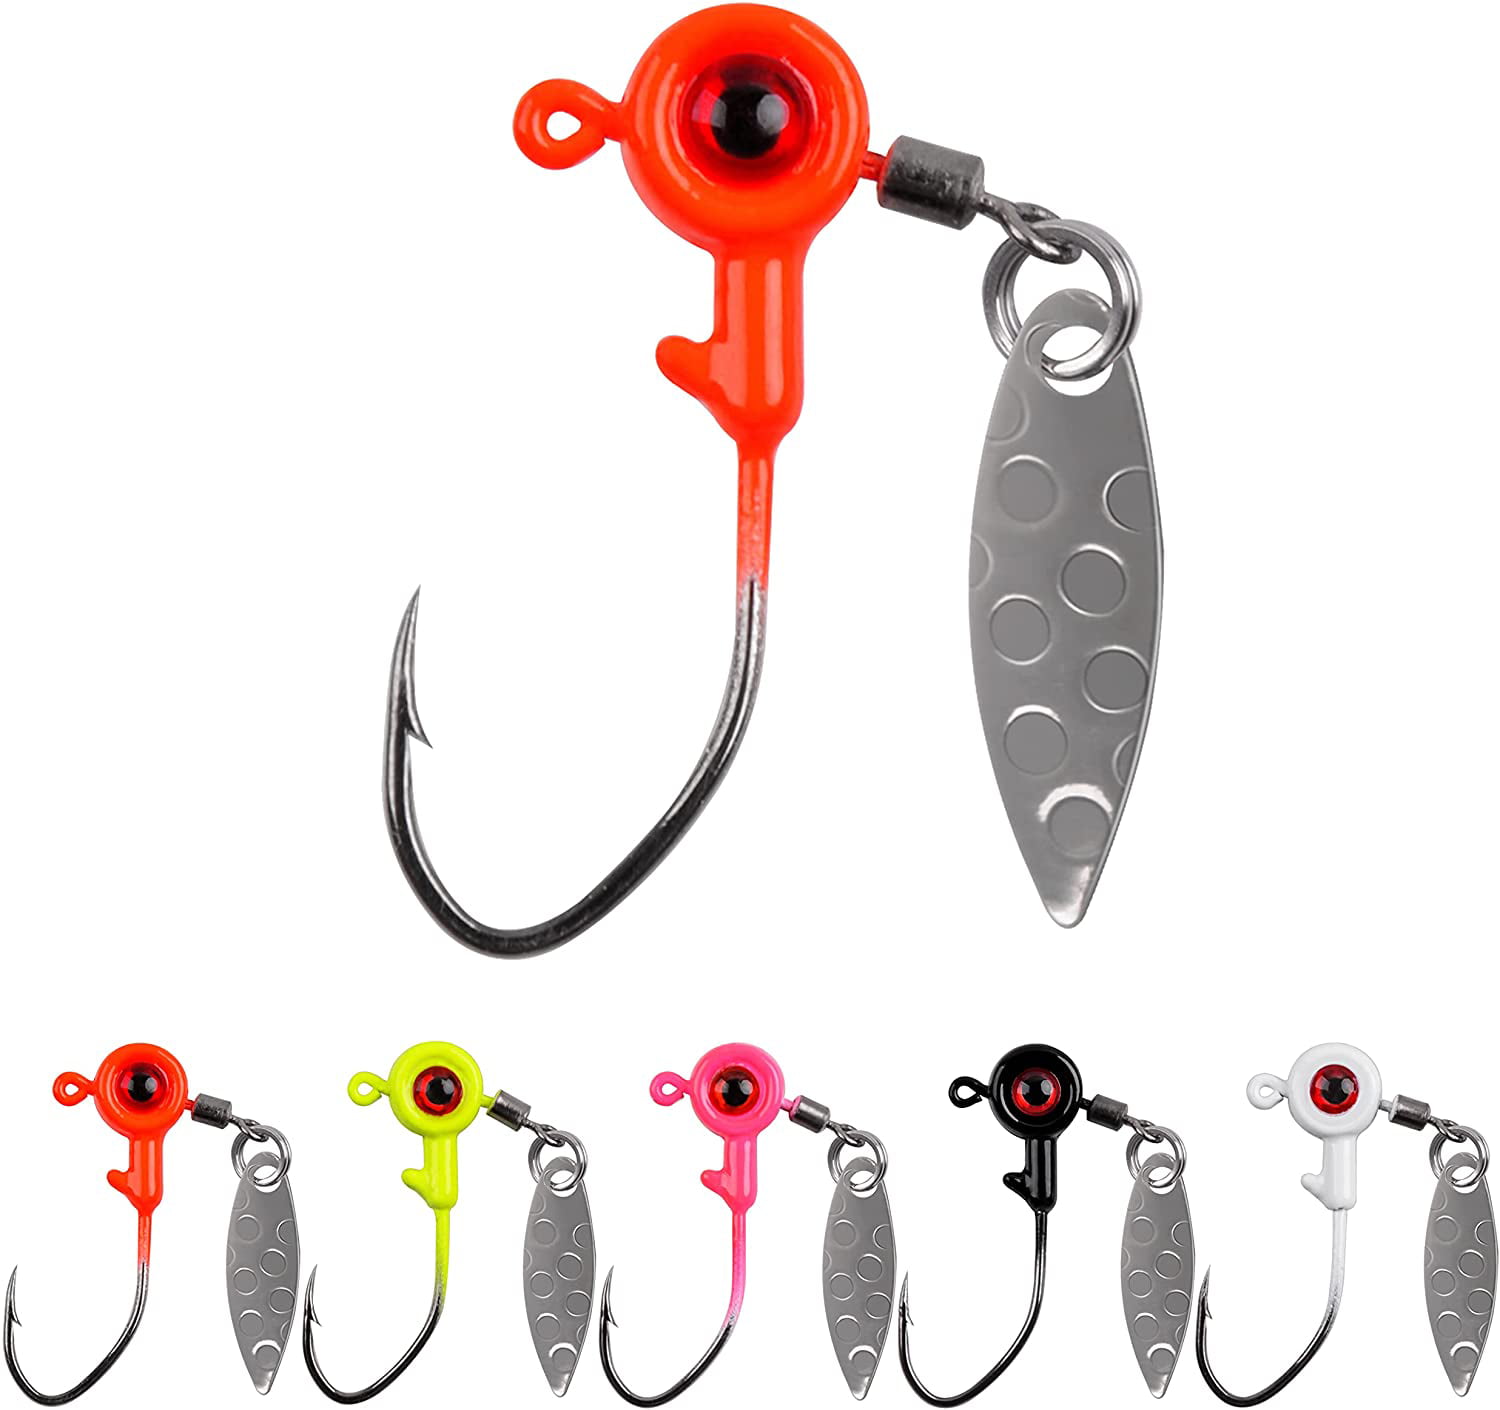 Crappie Jig Heads Fishing Hooks Kit,25pcs Underspin Lures Jig Head with  Spinner Blade Eye Ball Painted Fishing Jigs for Bass Trout Saltwater  Freshwater 1/16oz 1/8oz 3/16oz 